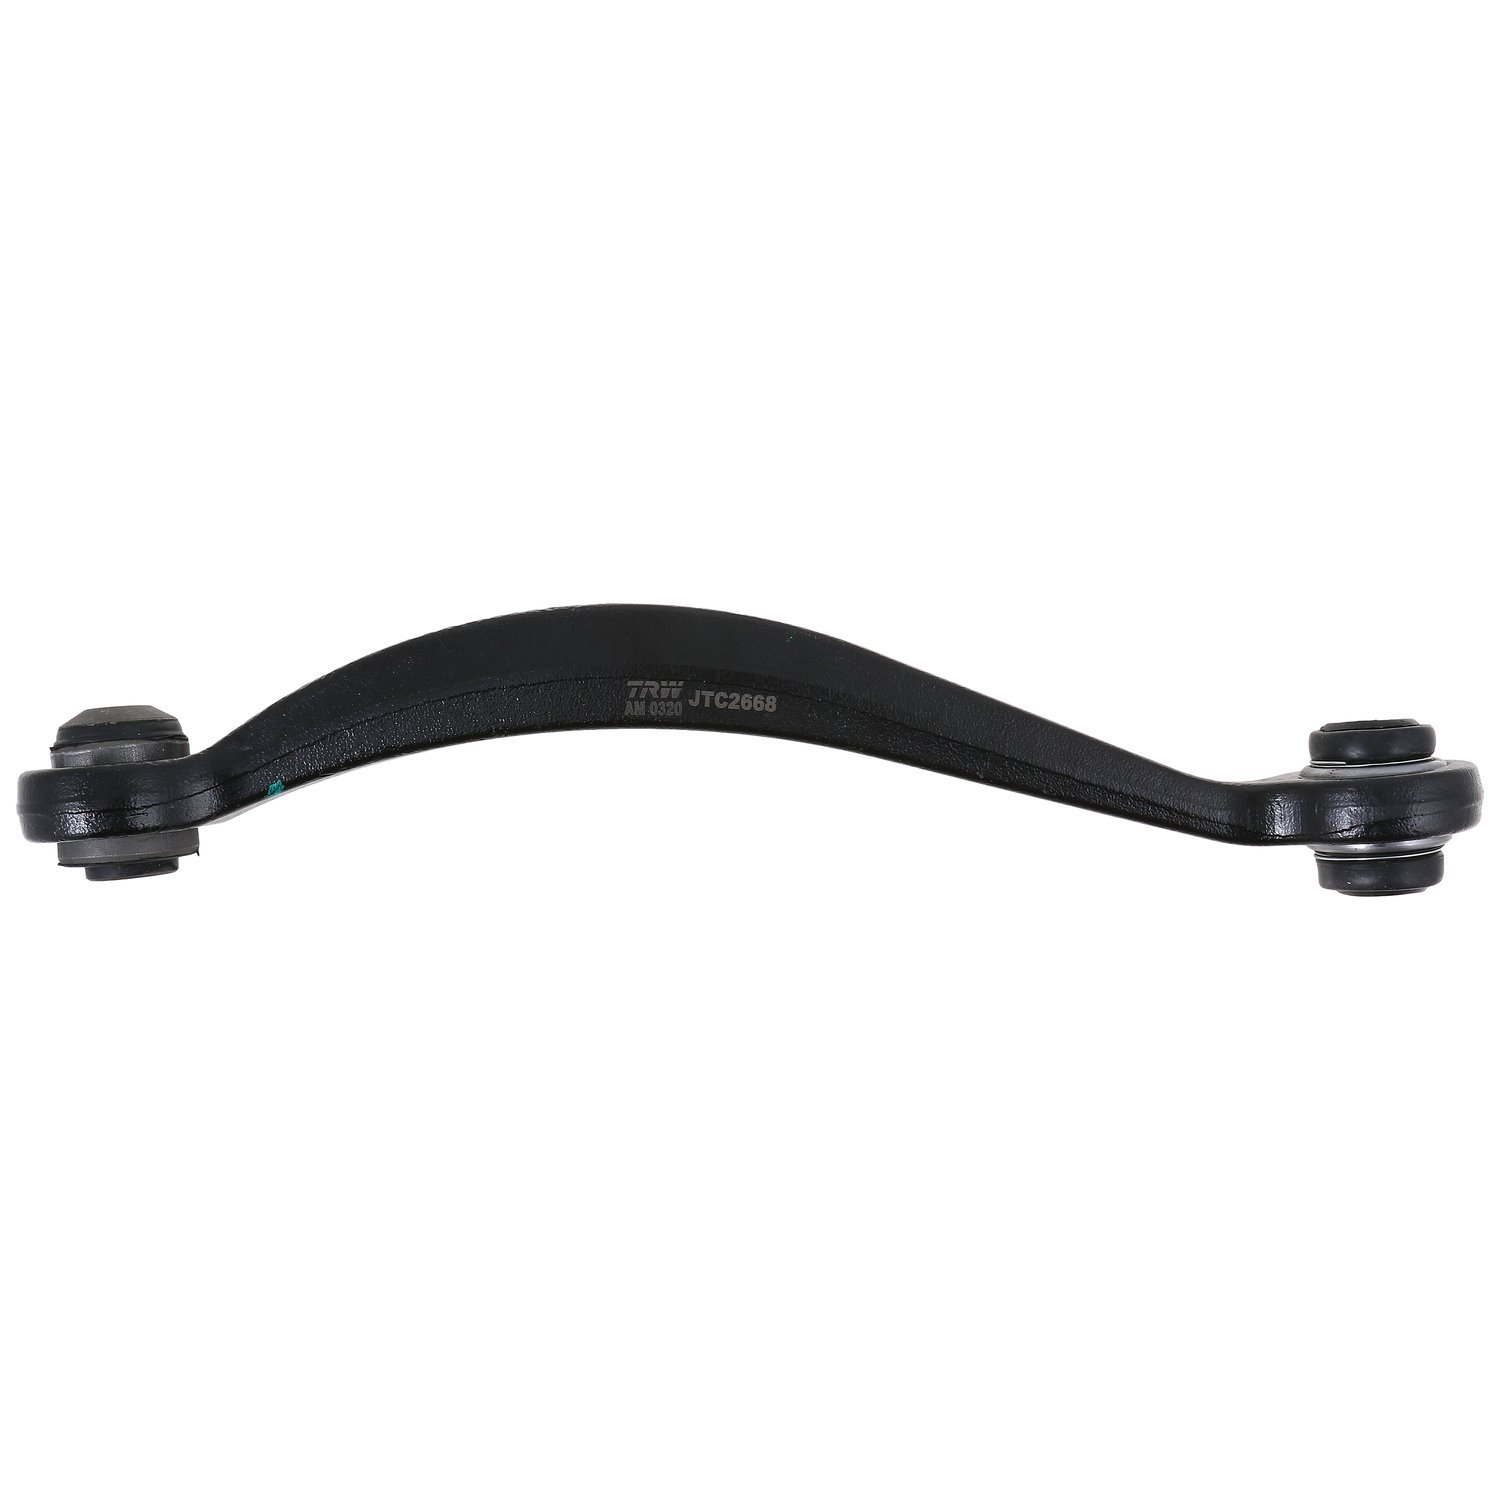 JTC2668 Control Arm Assembly Fits Select GM Models, Position: Left/Driver or Right/Passenger, Rear Upper Forward